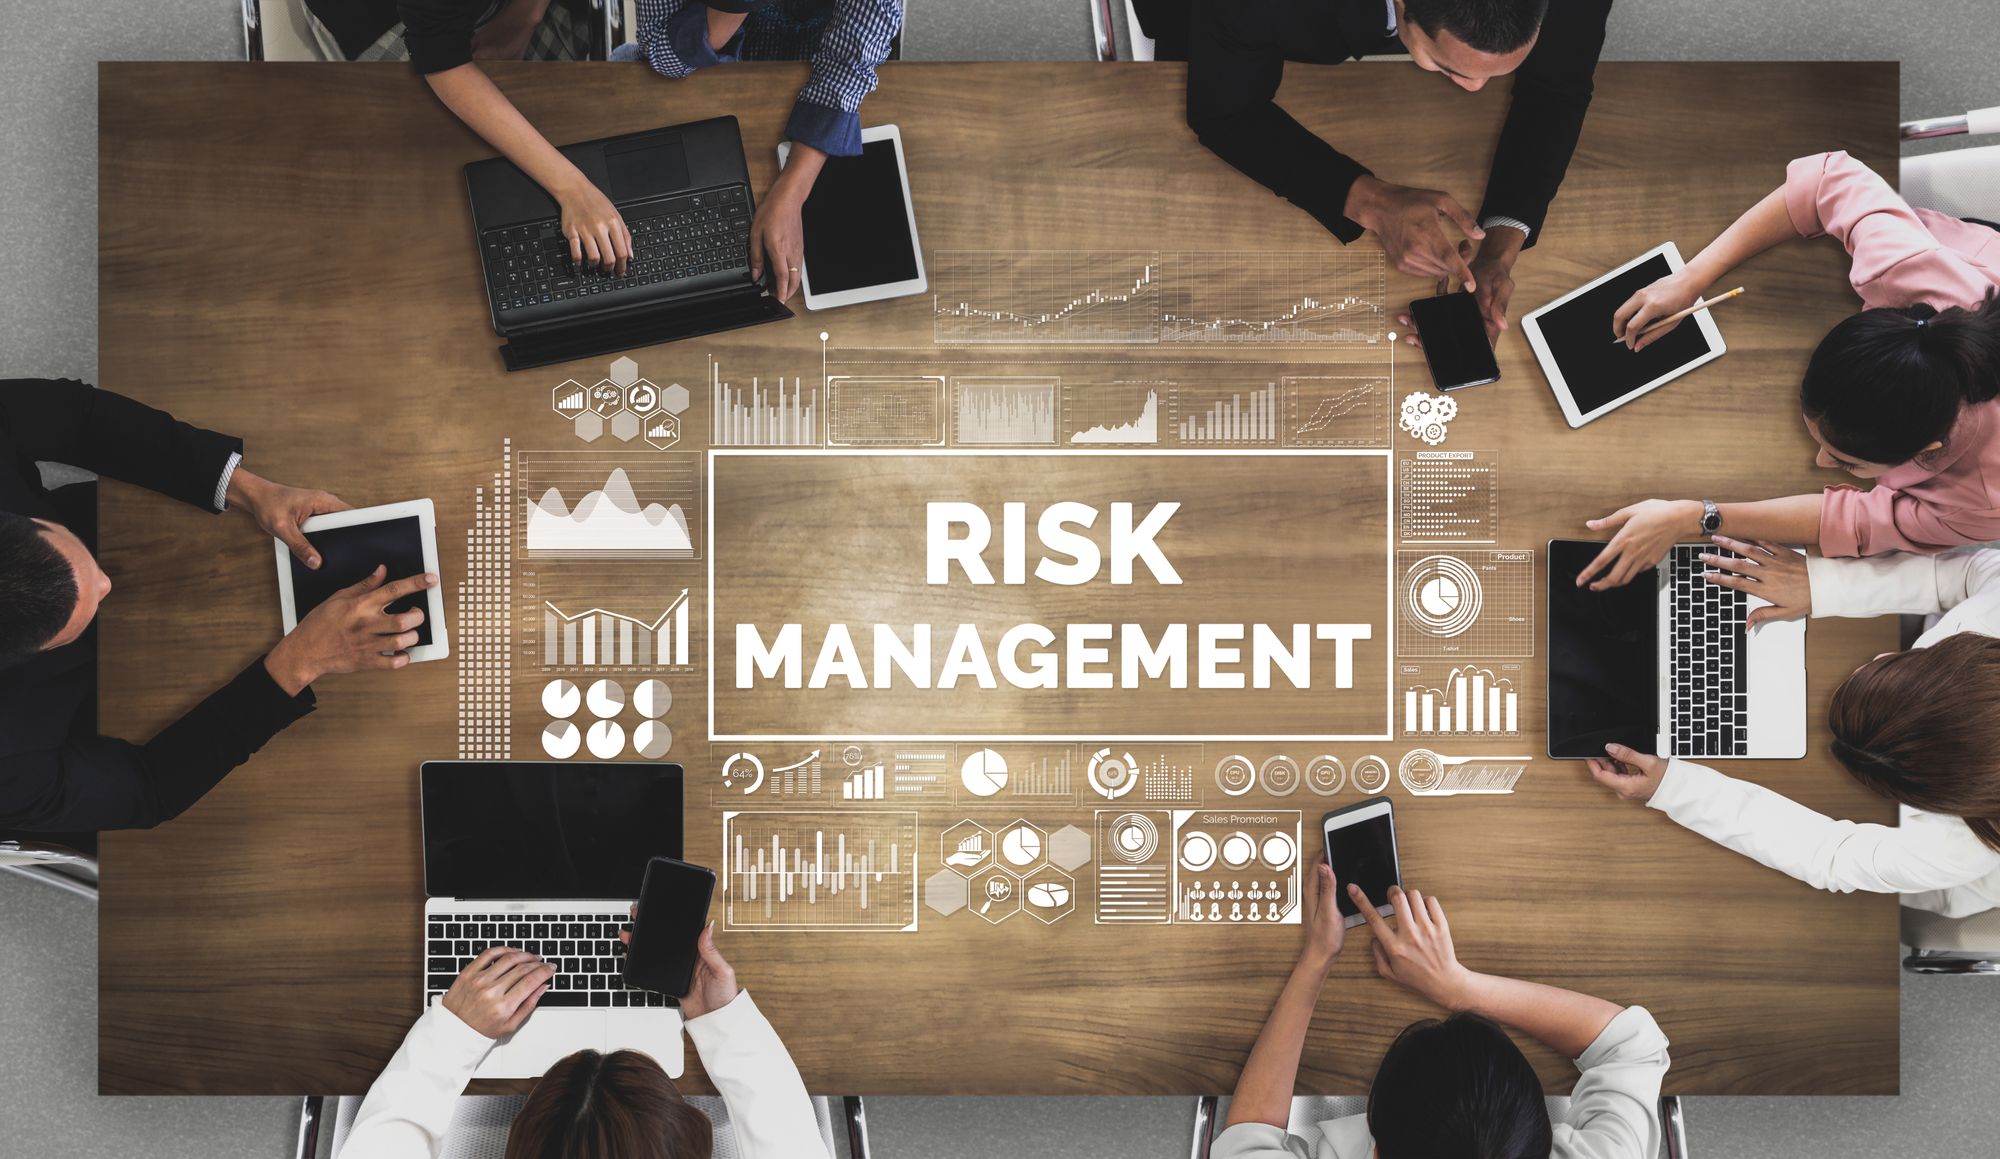 People sitting around a table discussing risk